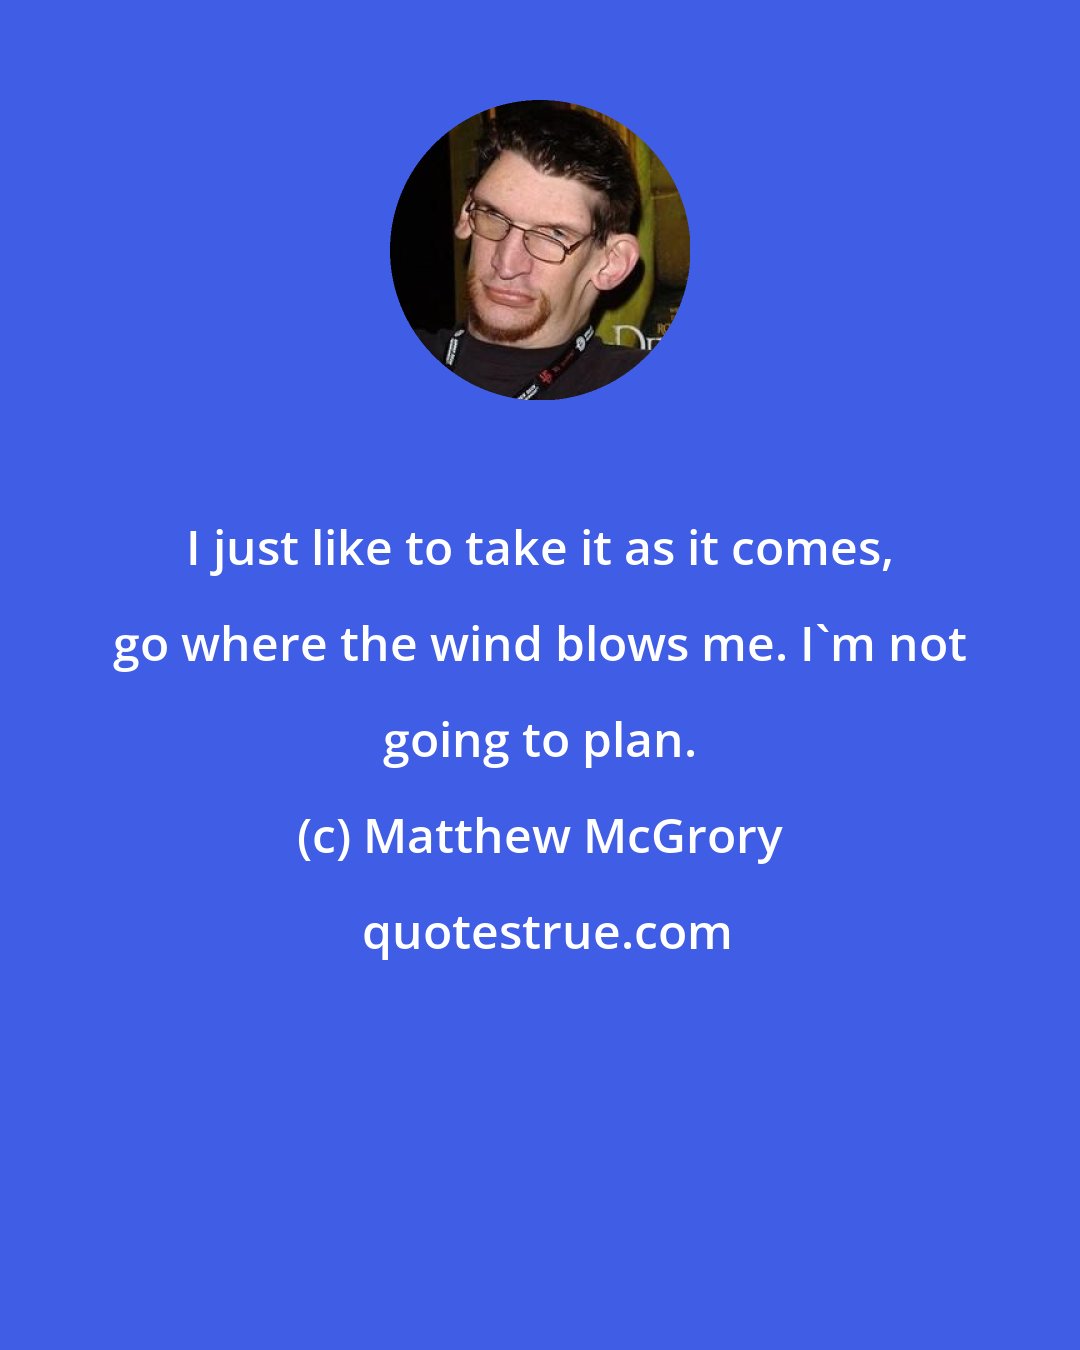 Matthew McGrory: I just like to take it as it comes, go where the wind blows me. I'm not going to plan.